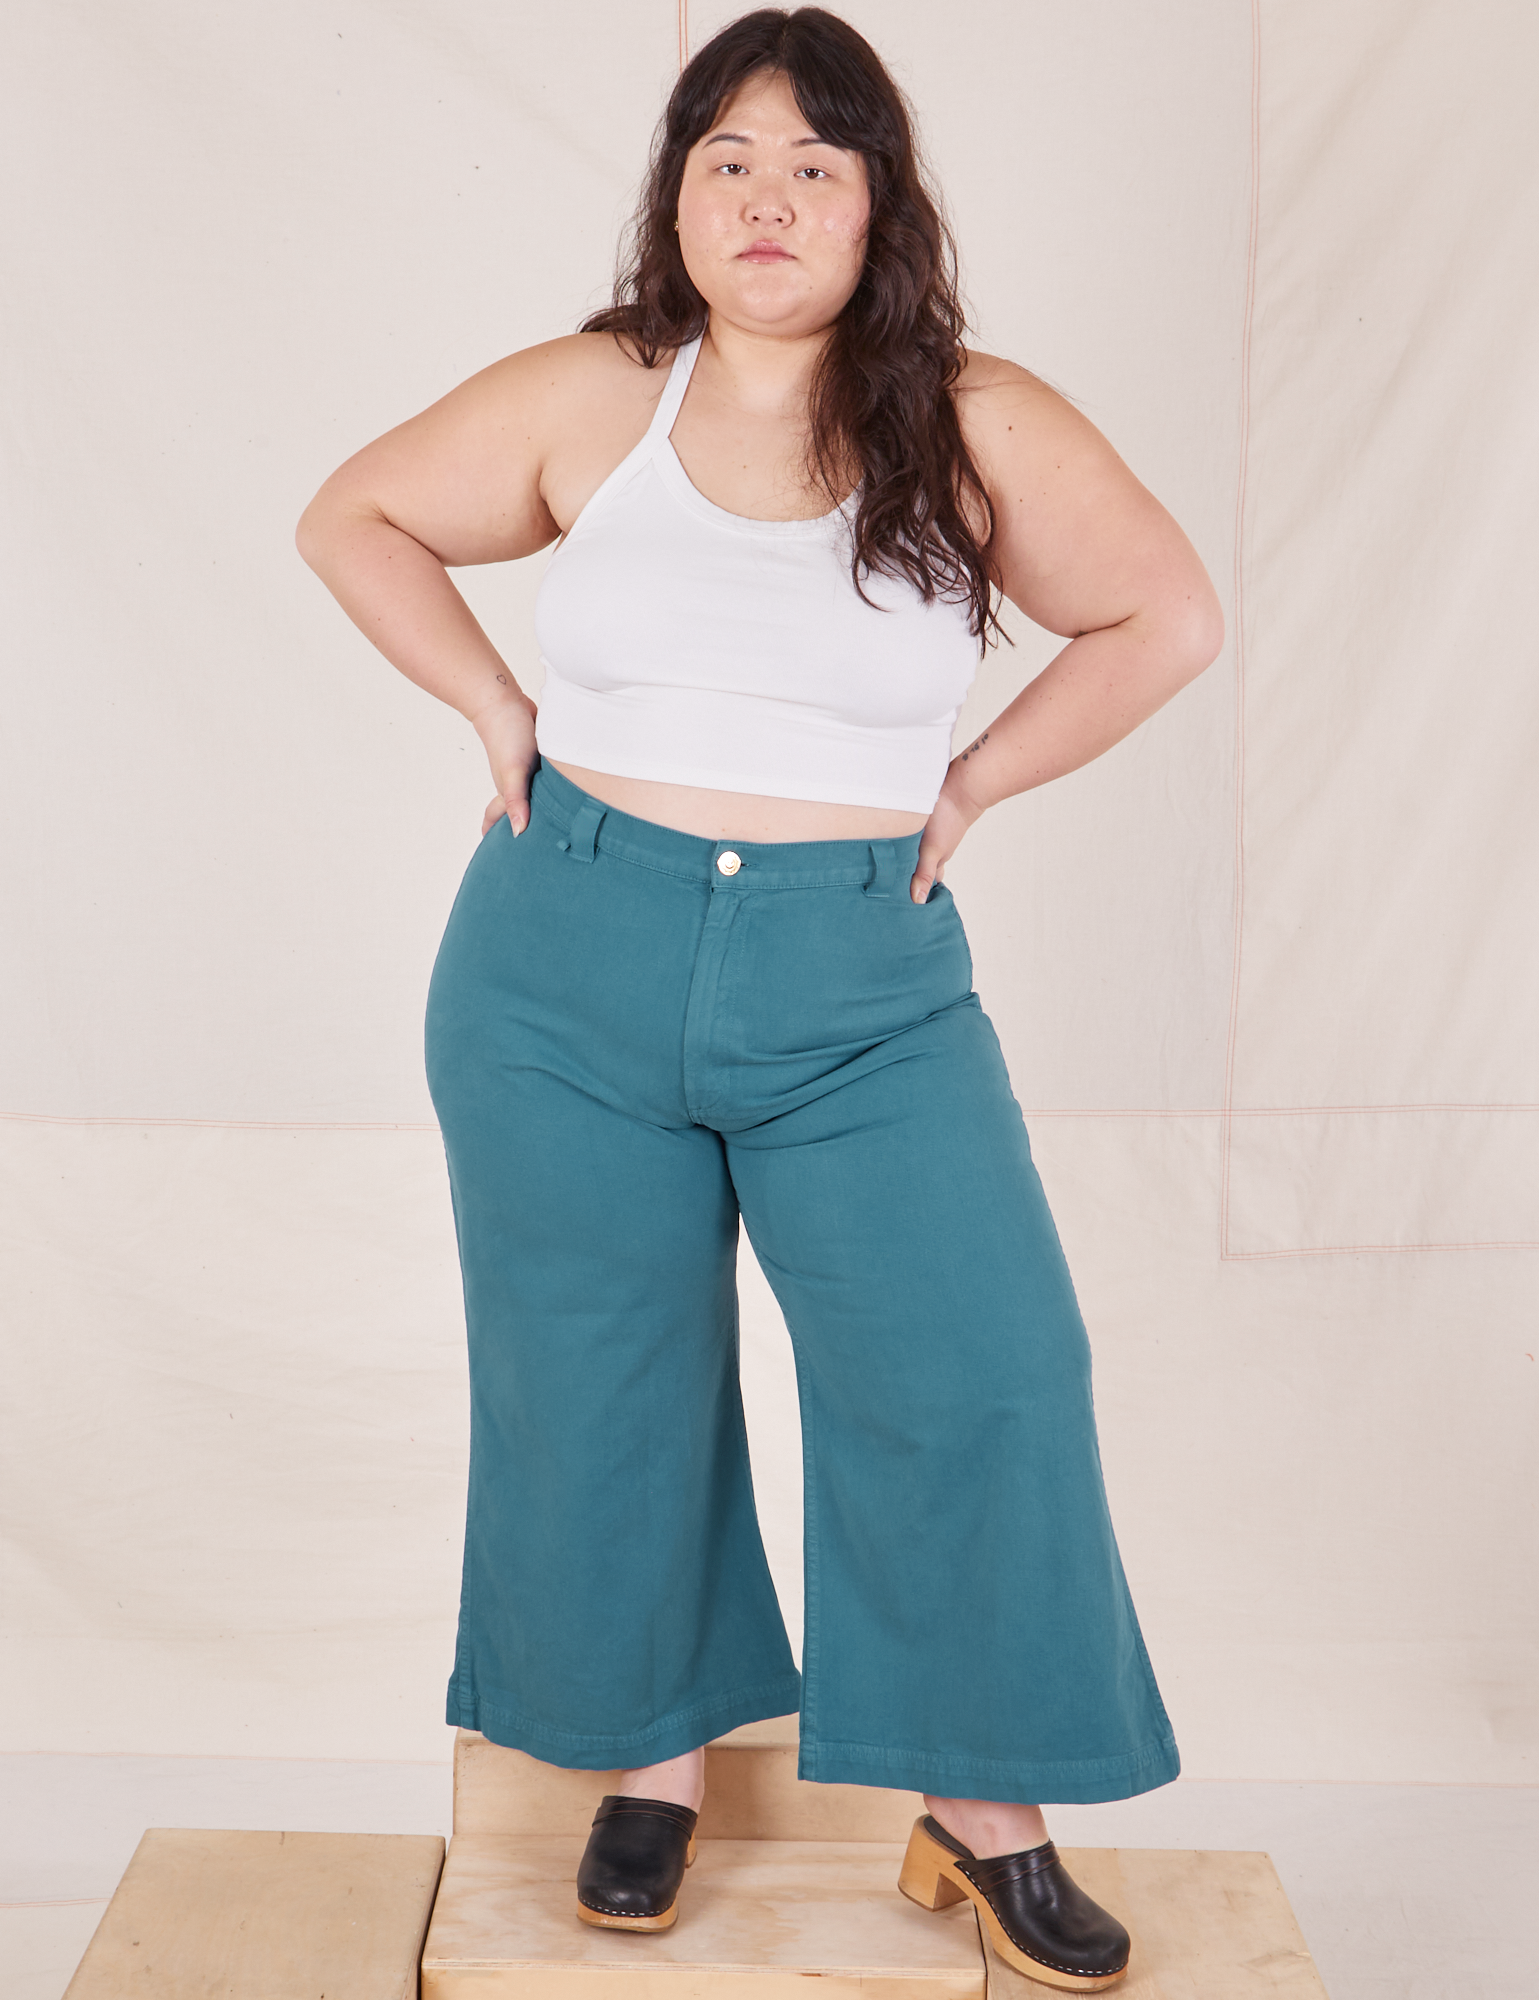 Ashley is 5&#39;7&quot; and wearing 1XL Petite Bell Bottoms in Marine Blue paired with Halter Top in vintage tee off-white